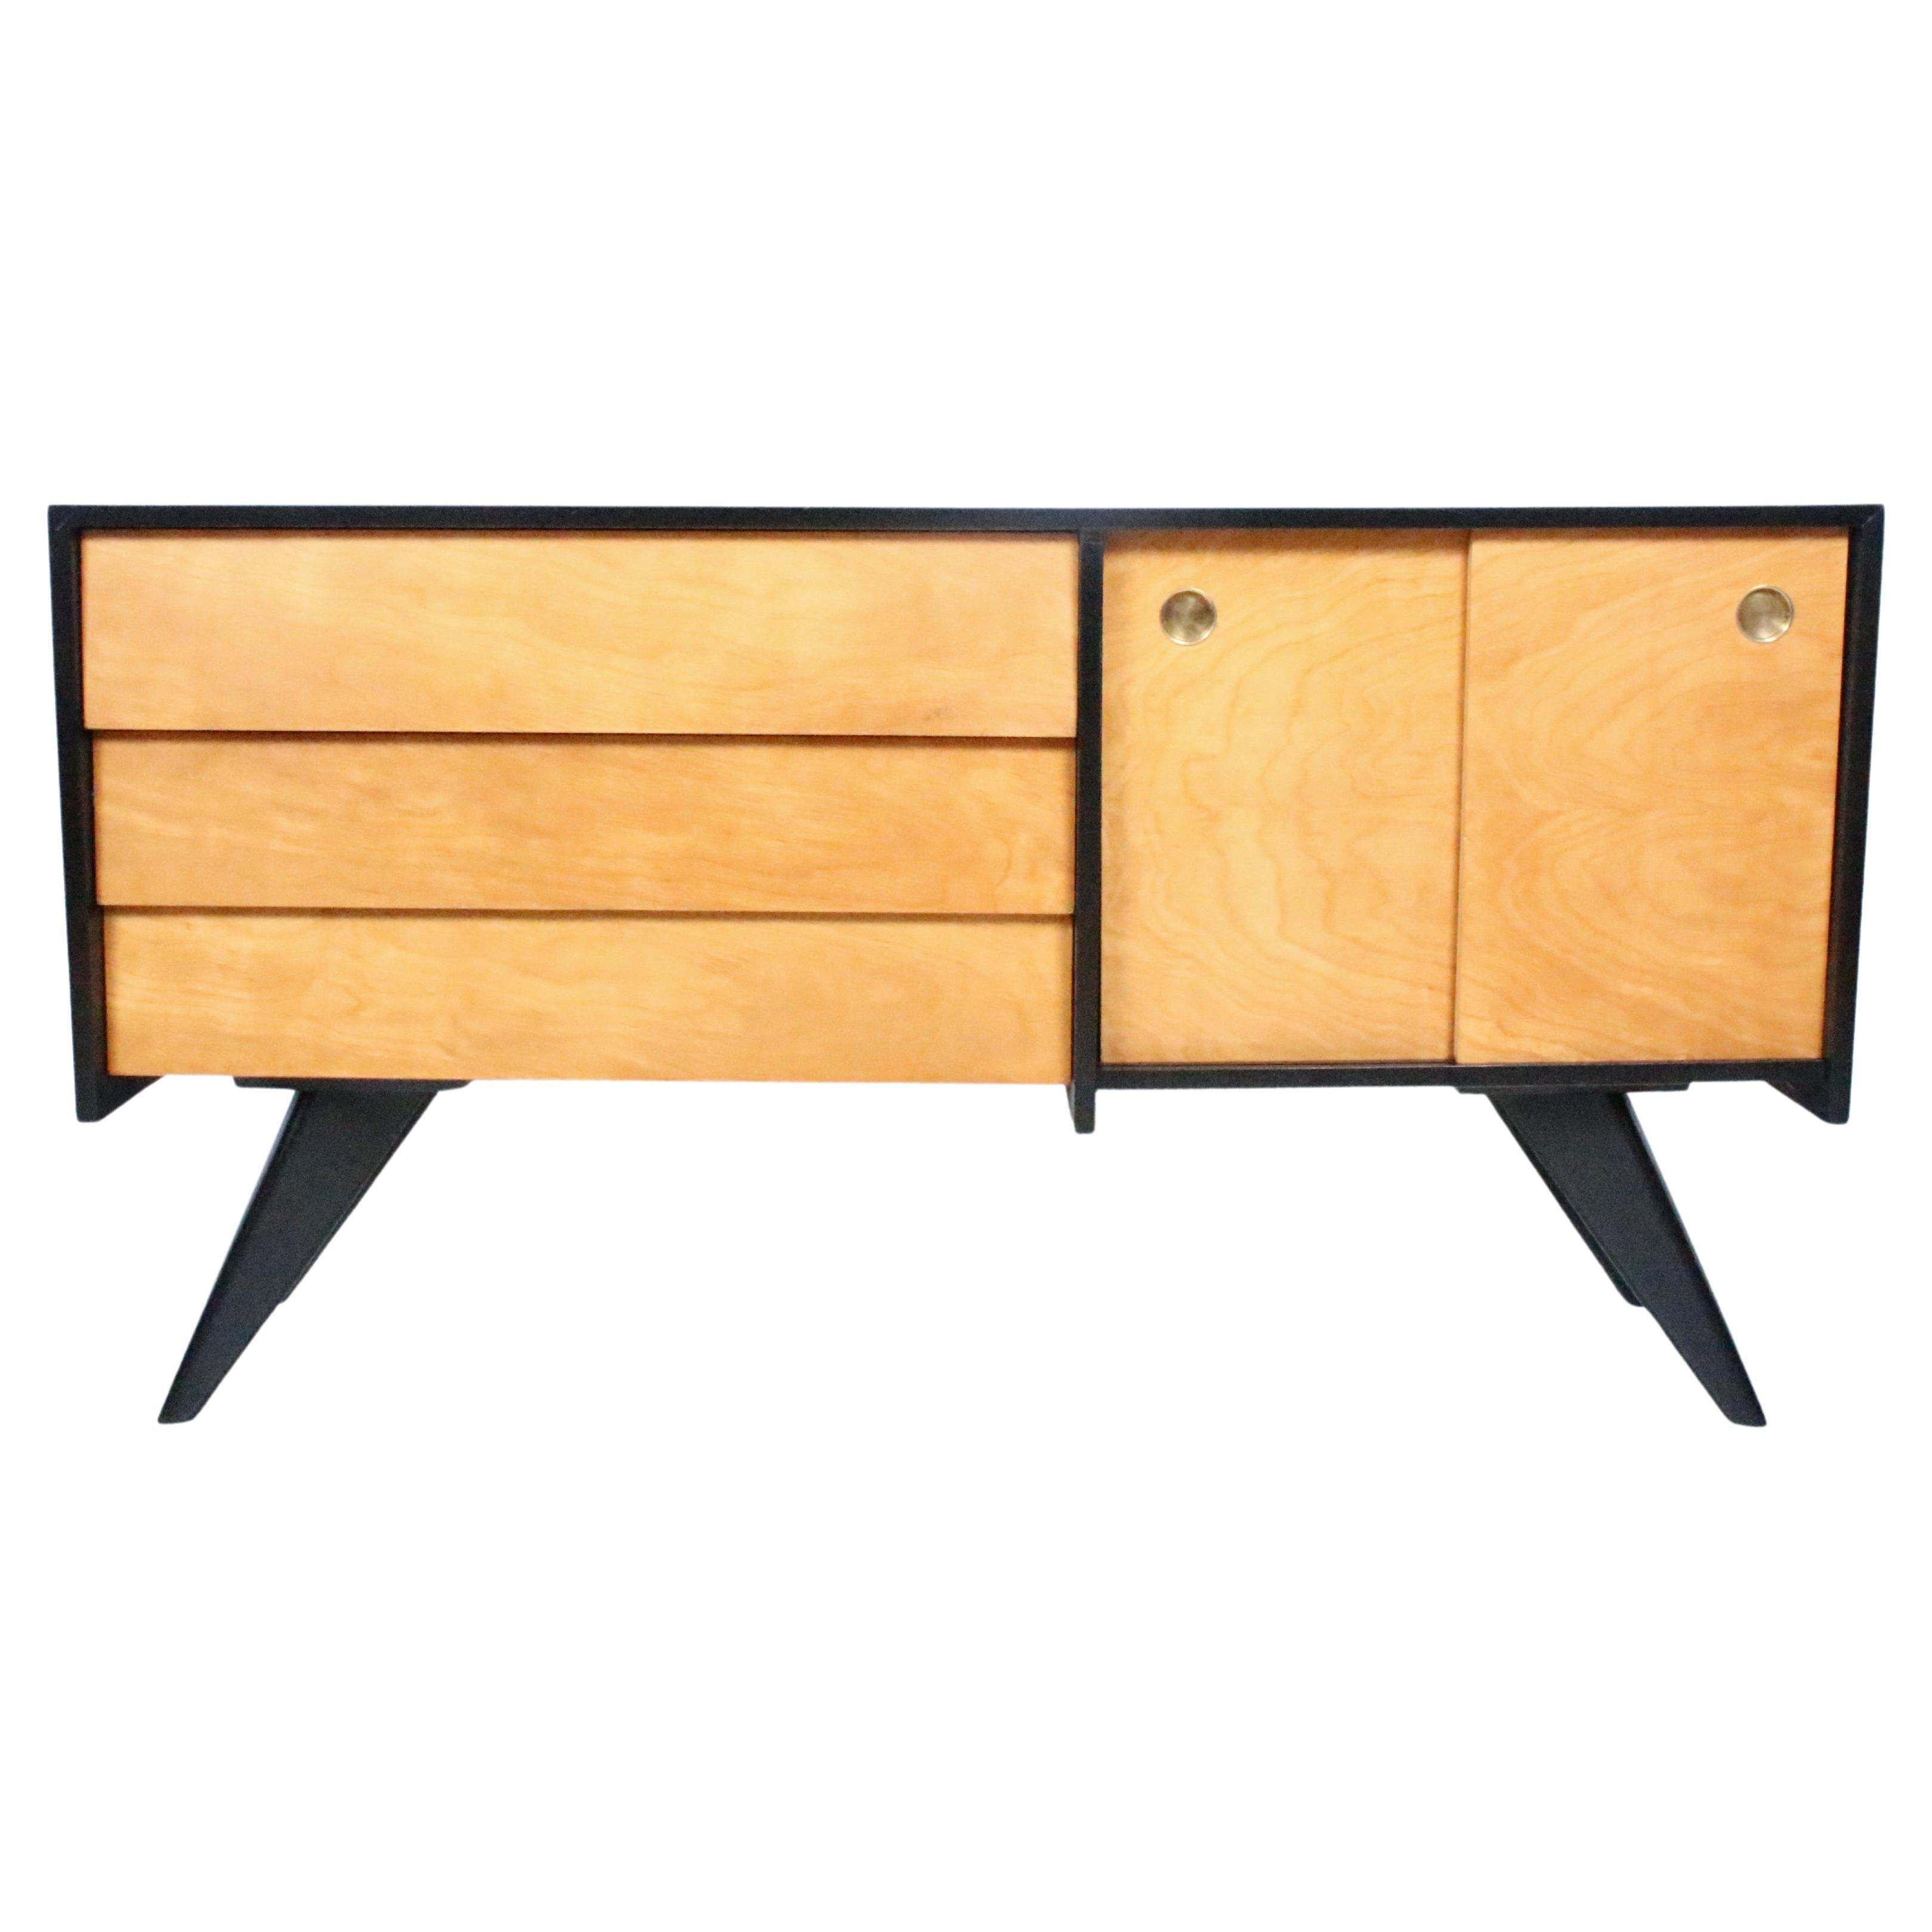 Russell Spanner Black Lacquer & Blonde Maple "Catalina" Credenza, 1950's